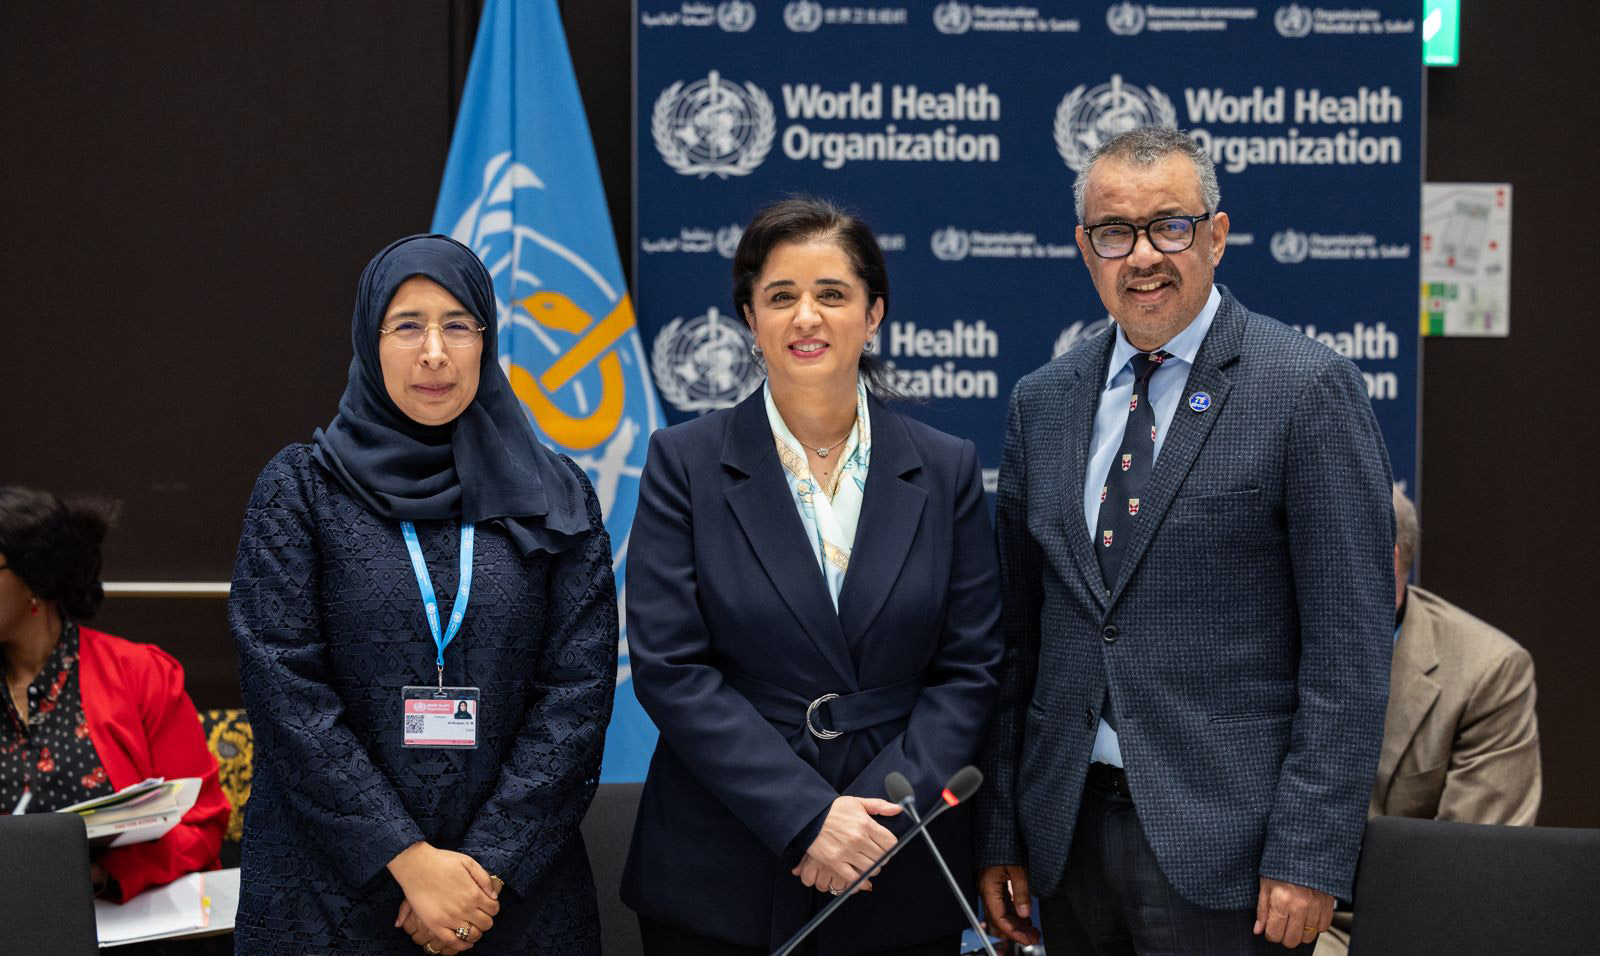 Dr Hanan Balkhy is appointed WHO Regional Director for the Eastern Mediterranean